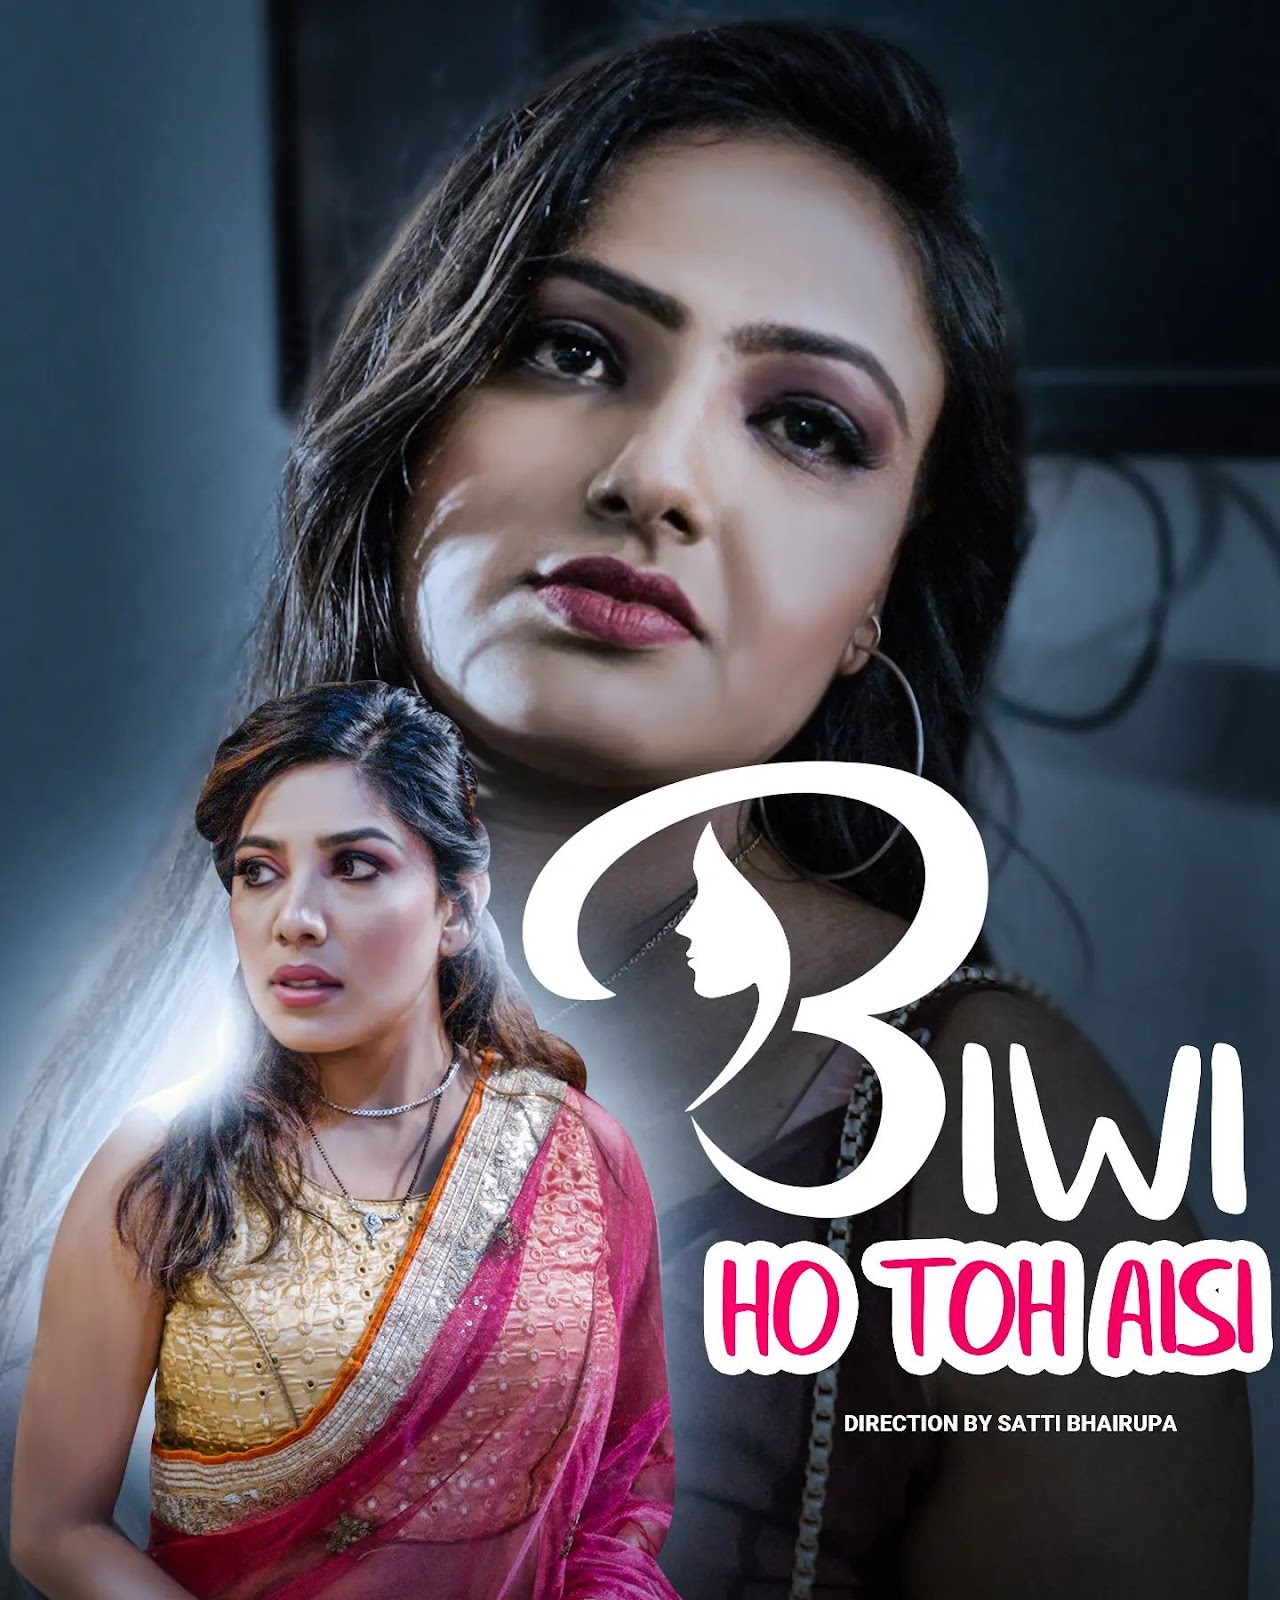 Bibi Ho To Aisi Web Series Cast, Actresses, Trailer And All Episodes Videos on WOOW app